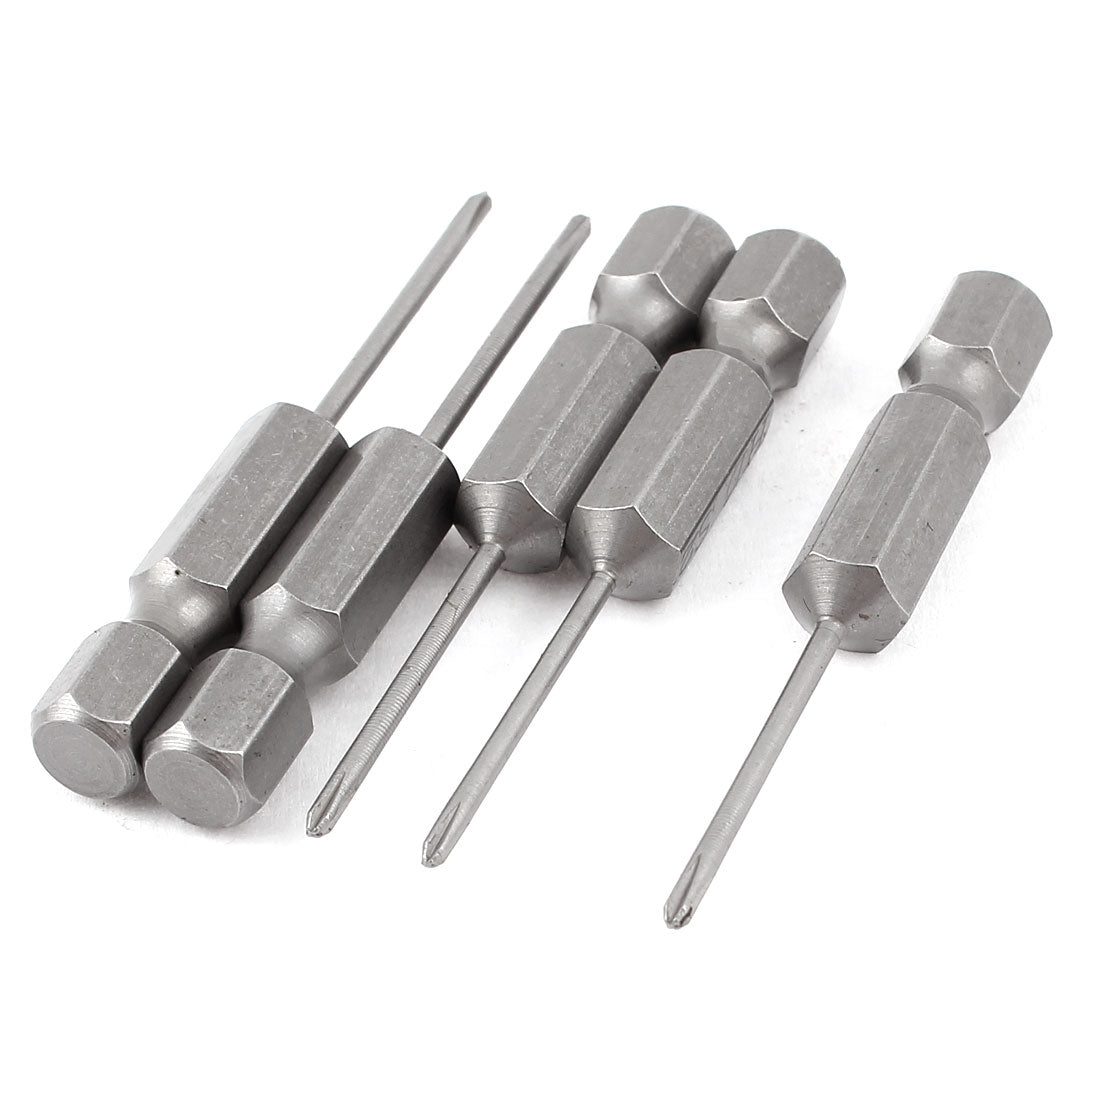 uxcell Uxcell 5pcs 1/4" Hex Shank 1.5mm Tip PH000 Magnetic Phillips Crosshead Screwdriver Bits 50mm